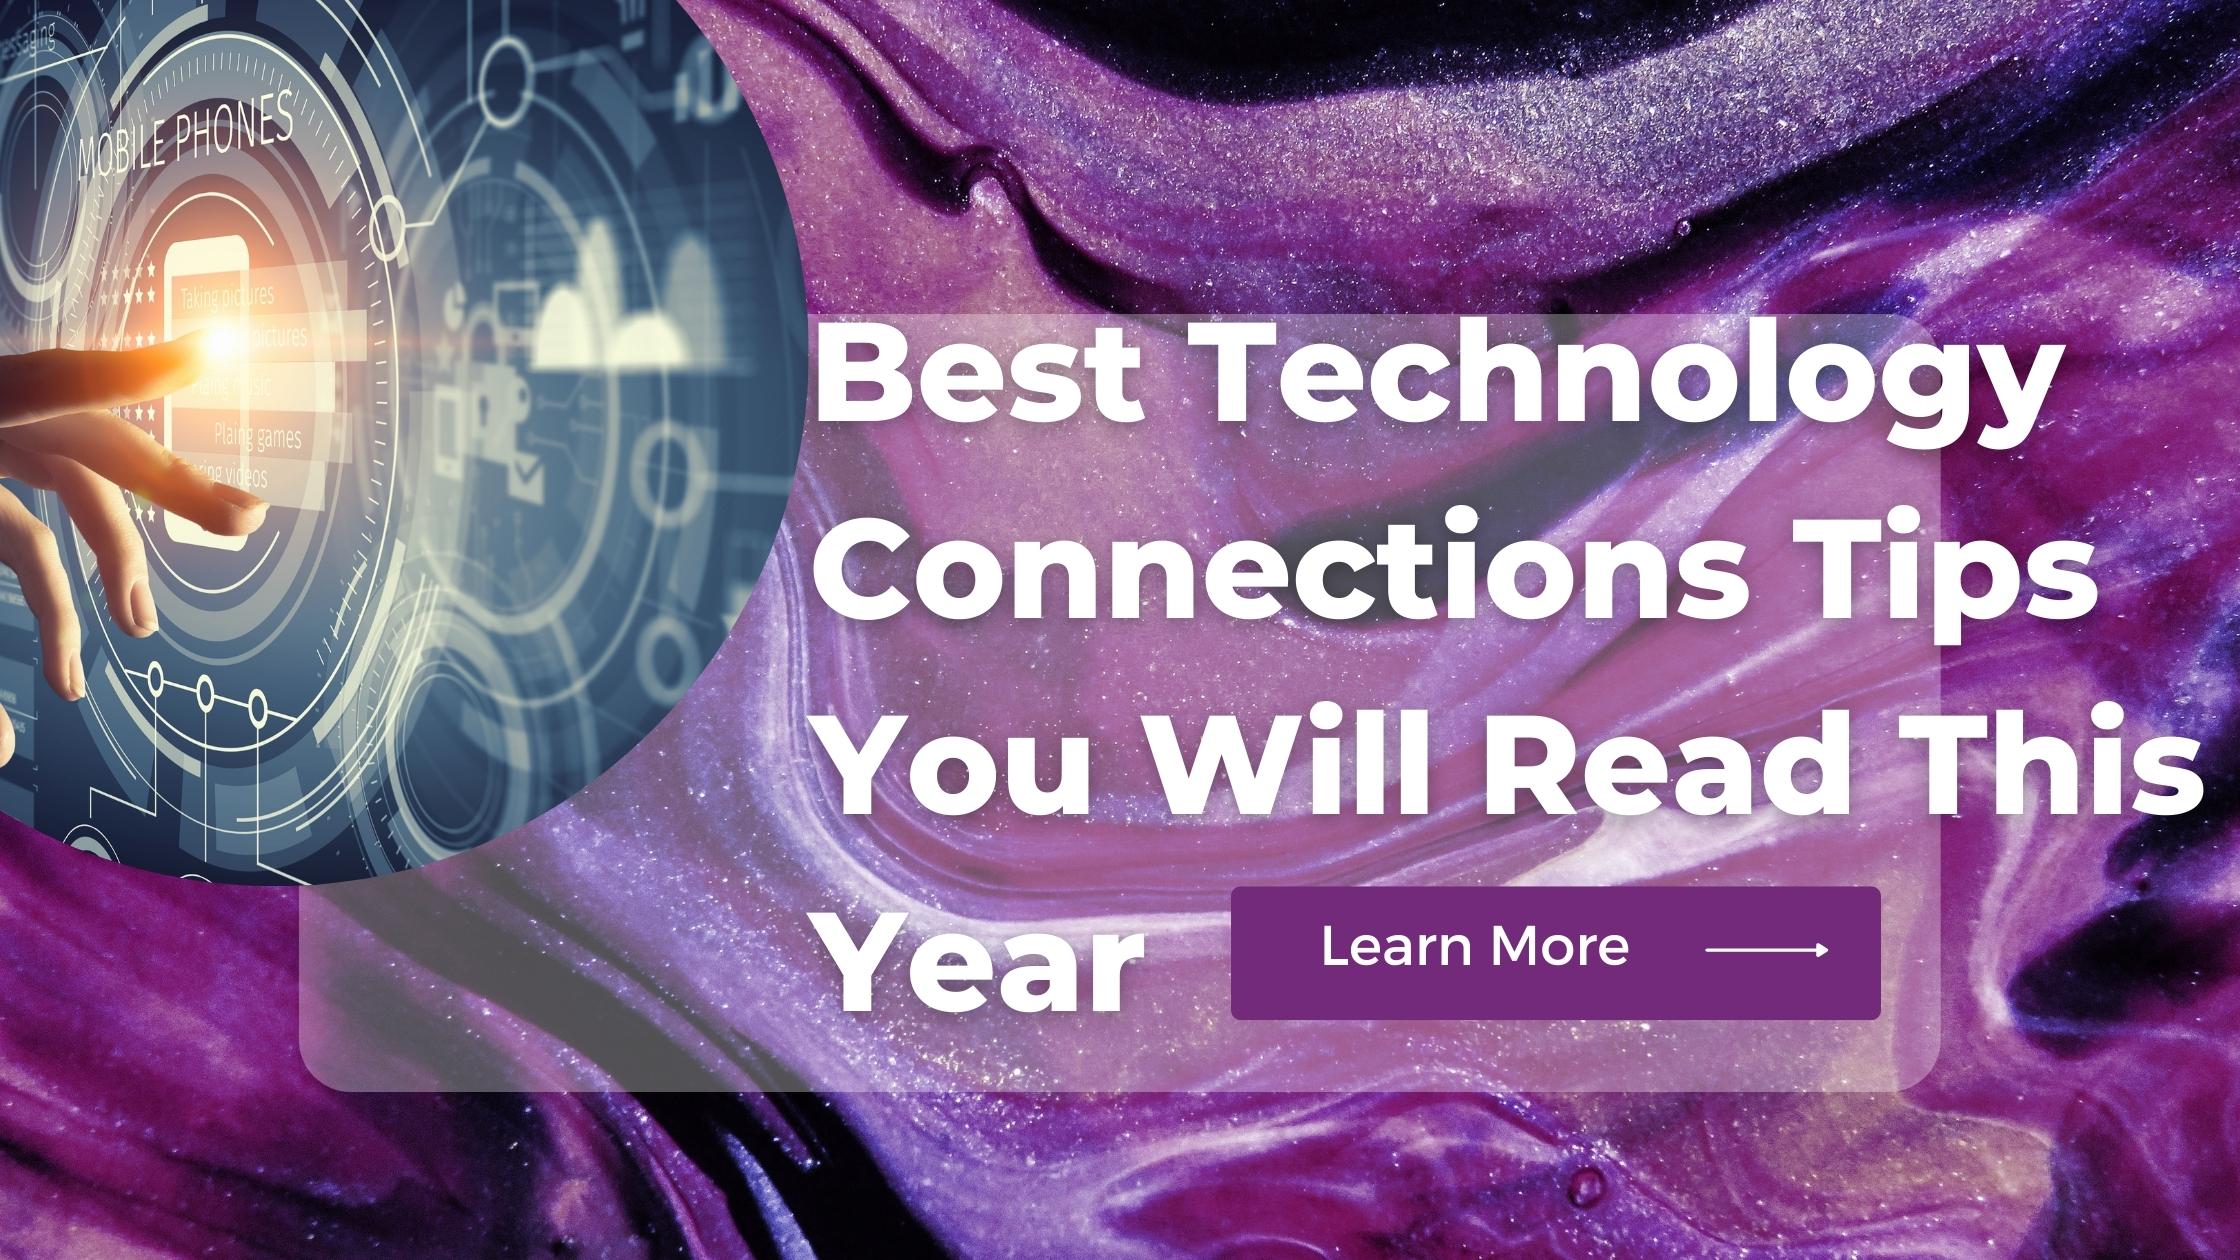 Best Technology Connections Tips You Will Read This Year